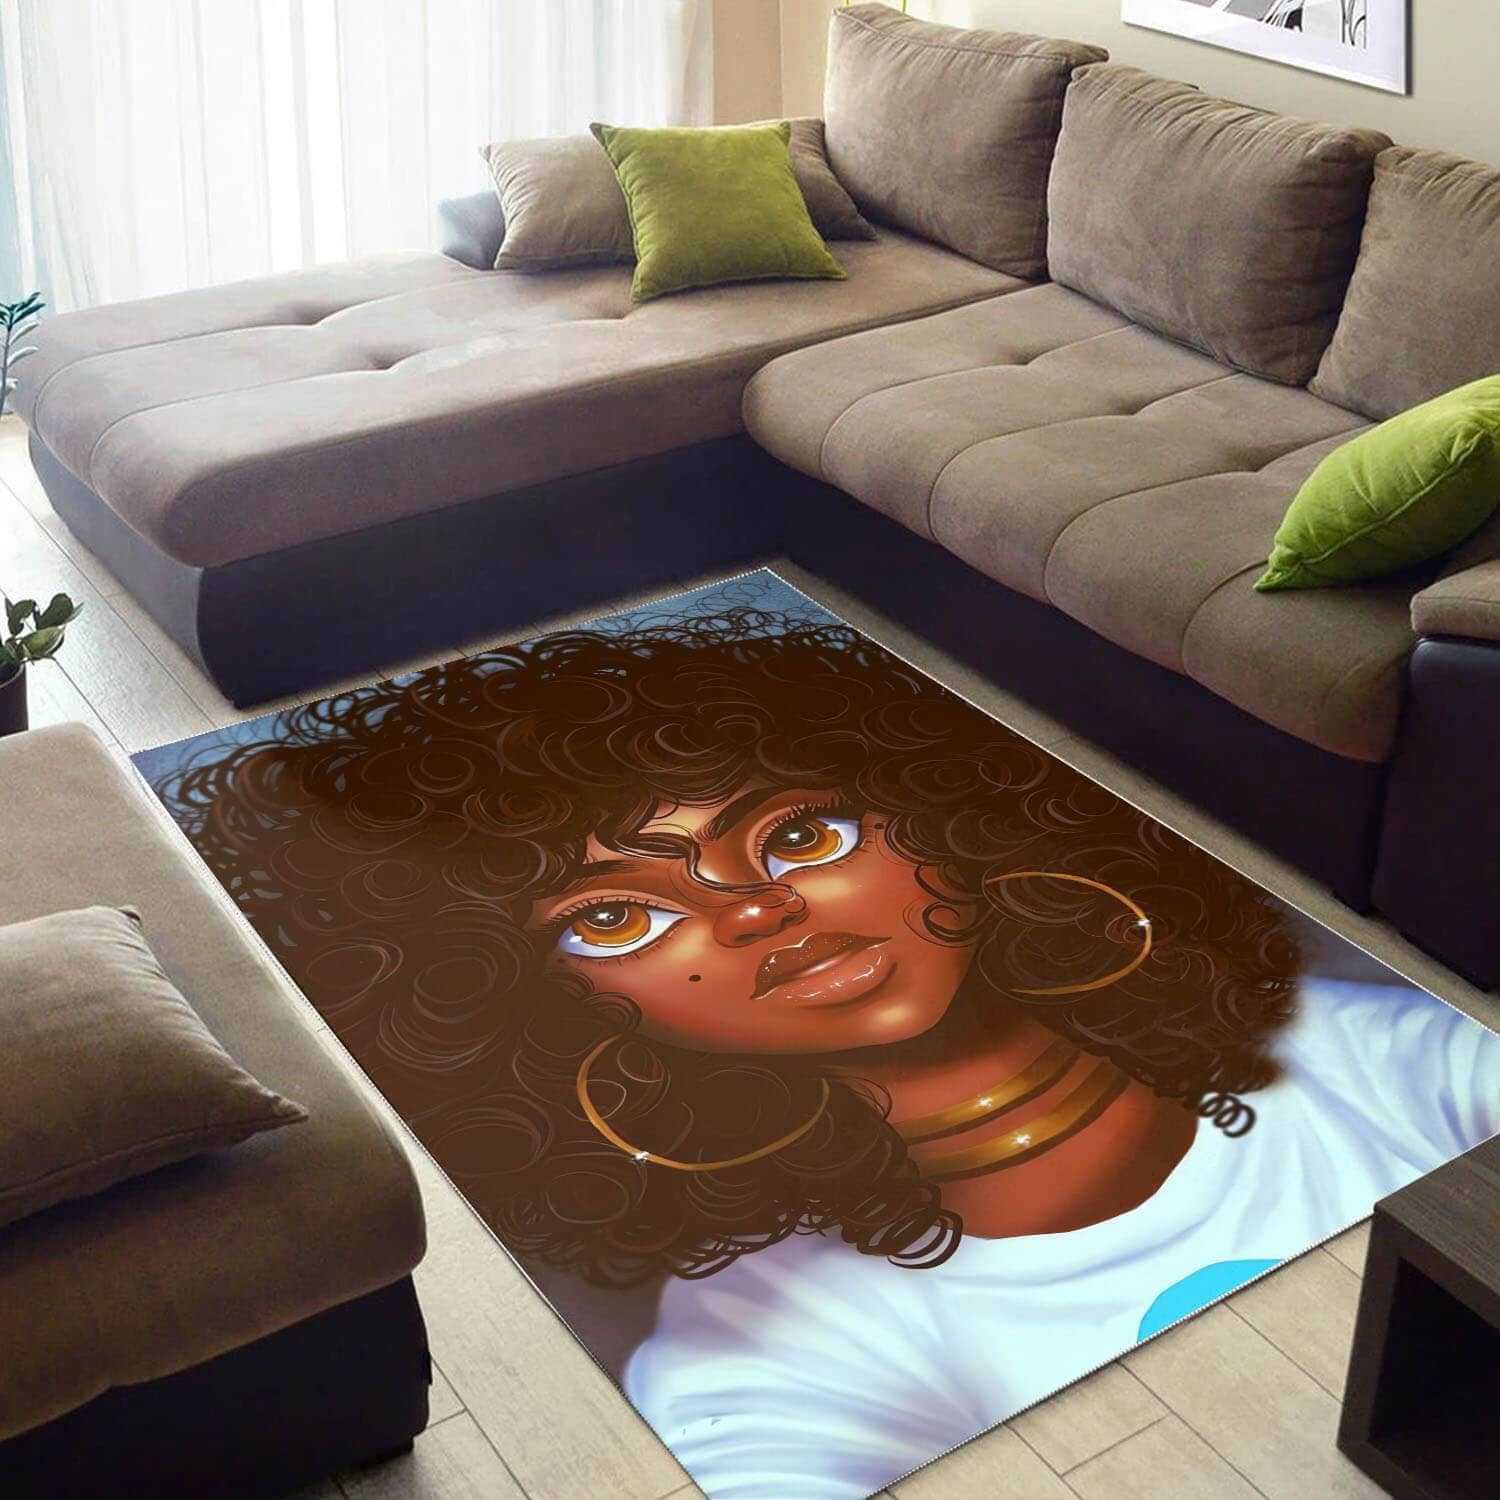 Afrocentric Beautiful Black Woman With Afro African Design Floor Themed Living Room Rug